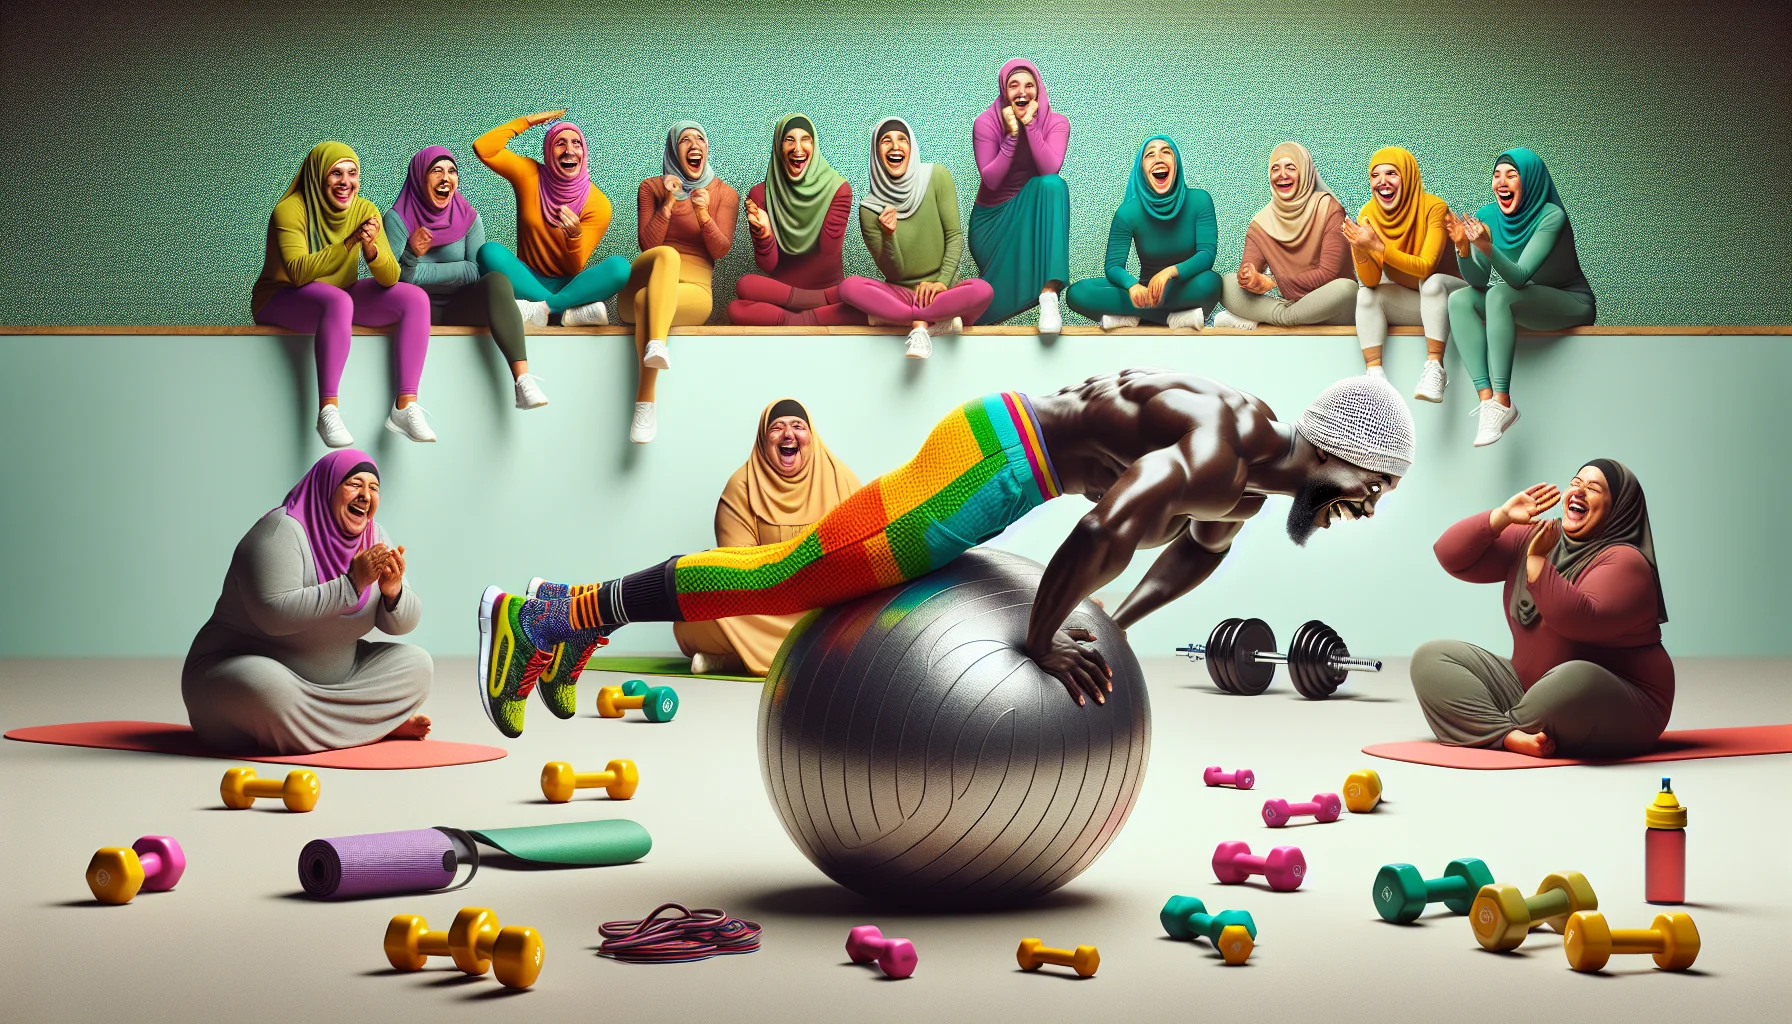 Create a lively, engaging image that showcases a hilariously rigged environment for performing calisthenics ab exercises. In the centre, place a Black male, lightly dressed in vibrant workout gear, executing a perfect plank on a ridiculously oversized Swiss ball. Fill the background with Middle-Eastern female onlookers, convulsed in laughter, dress them in comfortable, colourful activewear. Scatter around some fitness equipment - dumbbells, resistance bands, exercise mats - arranged in a comically haphazard manner. The goal is to promote a fun, welcoming atmosphere around the idea of incorporating ab exercises into a daily routine.